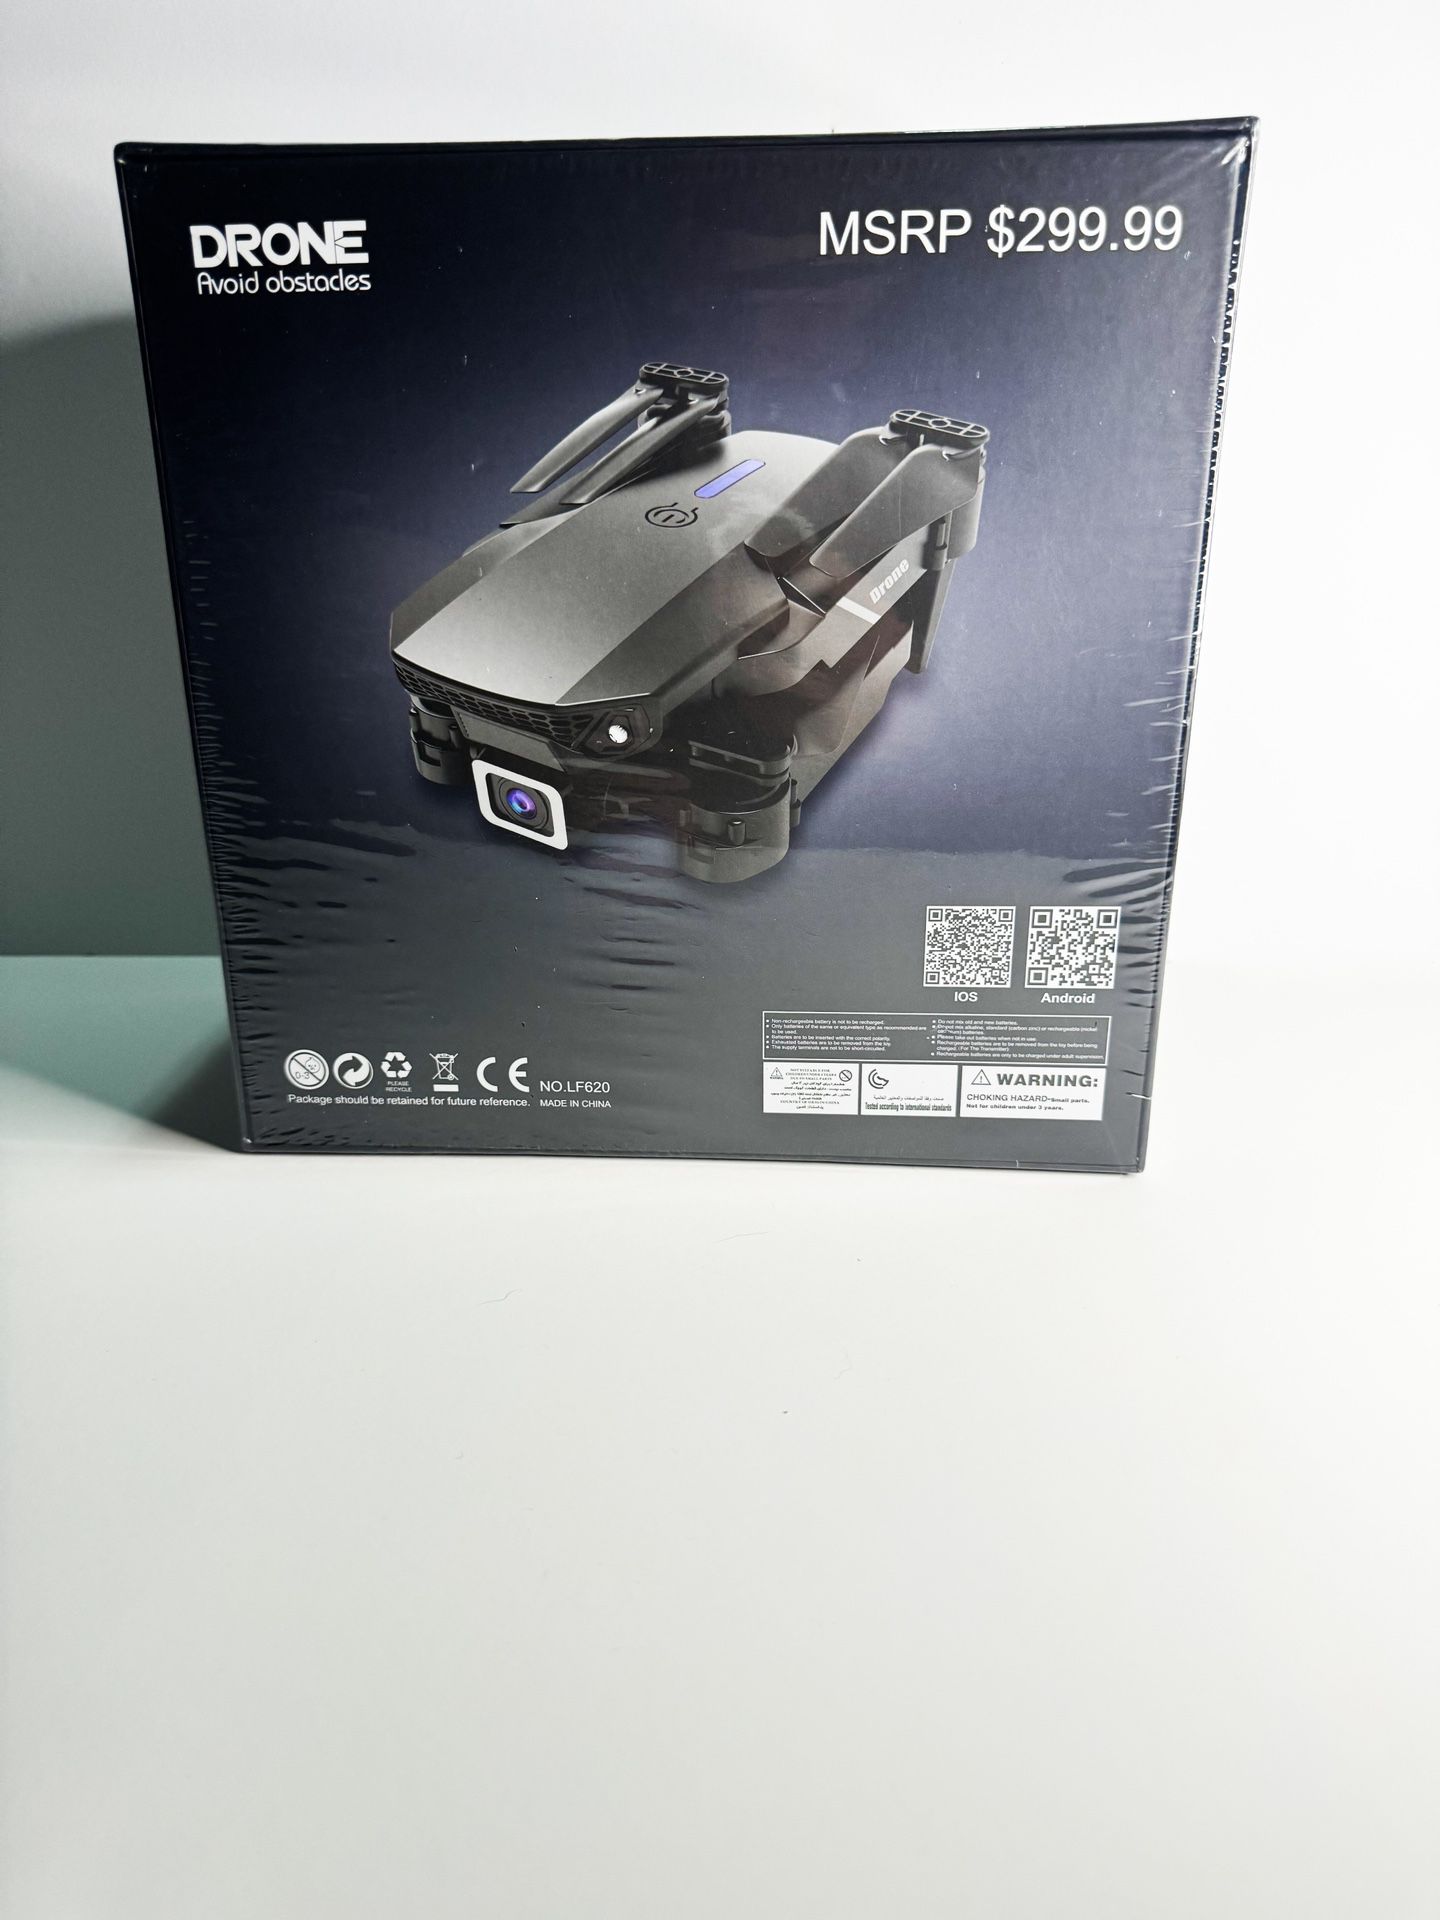 Drone-Avoid Obstacles SMS 4k Camera NEW SEALED SMS Retail $299.99 "New & Sealed"